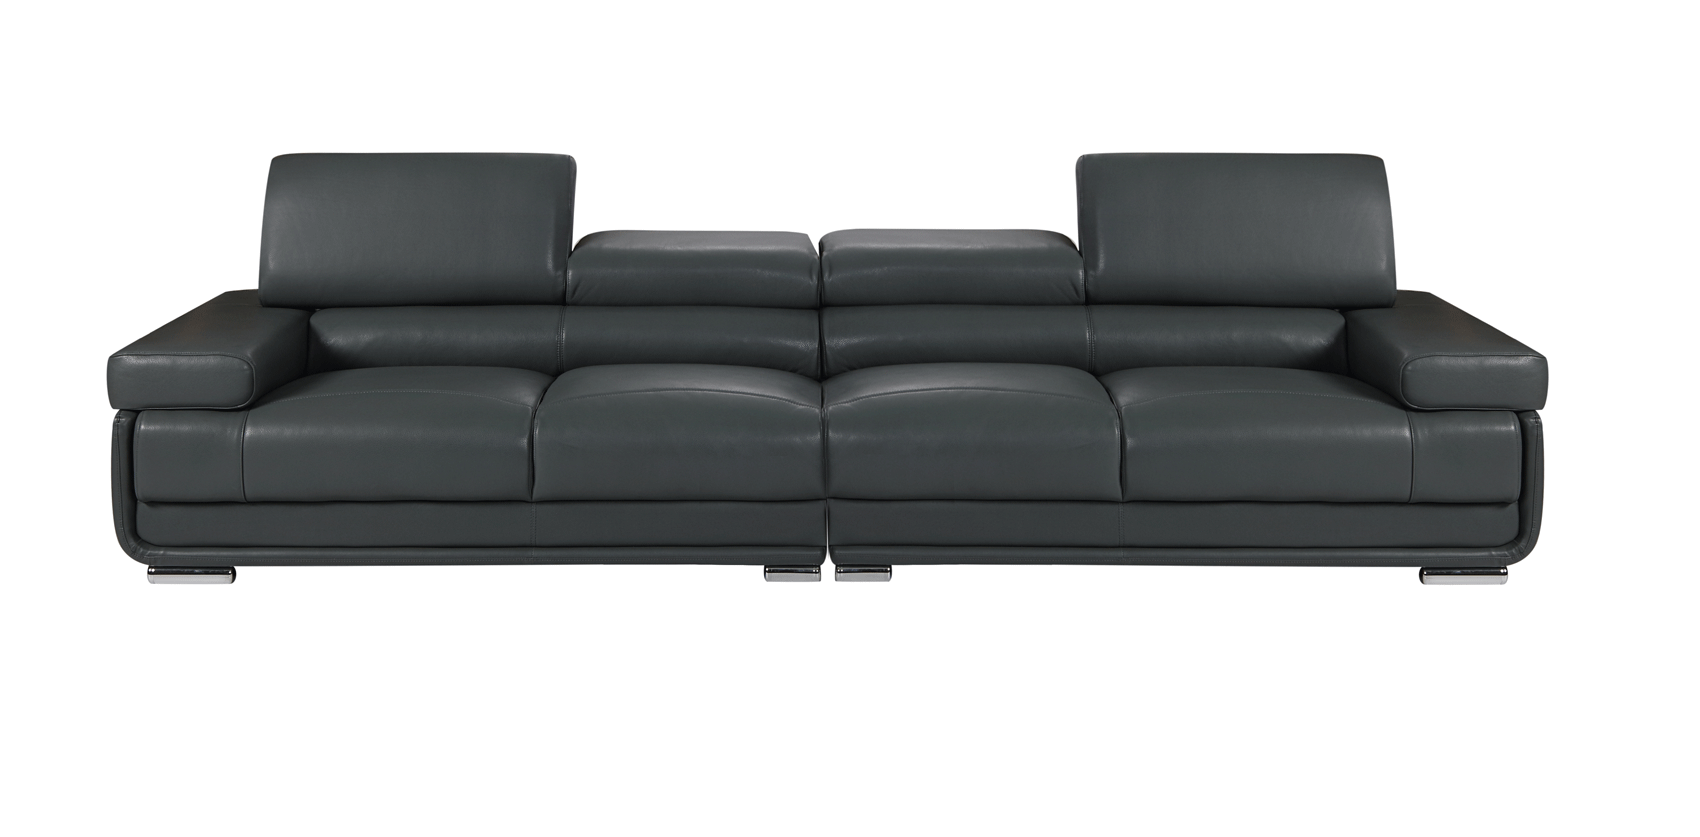 Living Room Furniture Sectionals with Sleepers 2119 Sofa, Loveseat, Chair